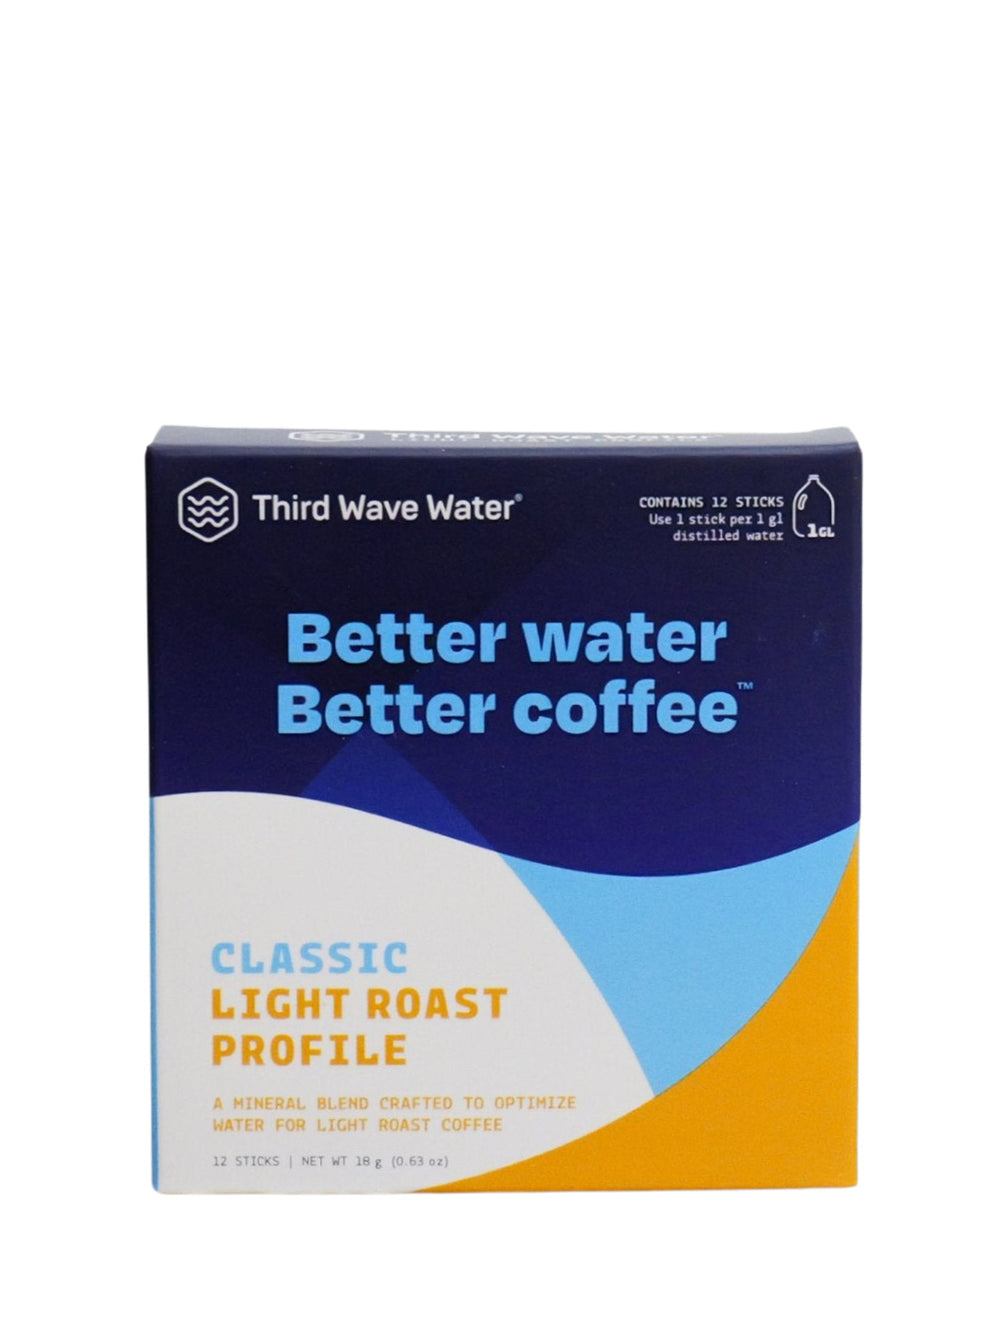 Photo of THIRD WAVE WATER Classic Light Roast Profile ( 1 Gallon ) [ Third Wave Water ] [ Water Enhancement ]